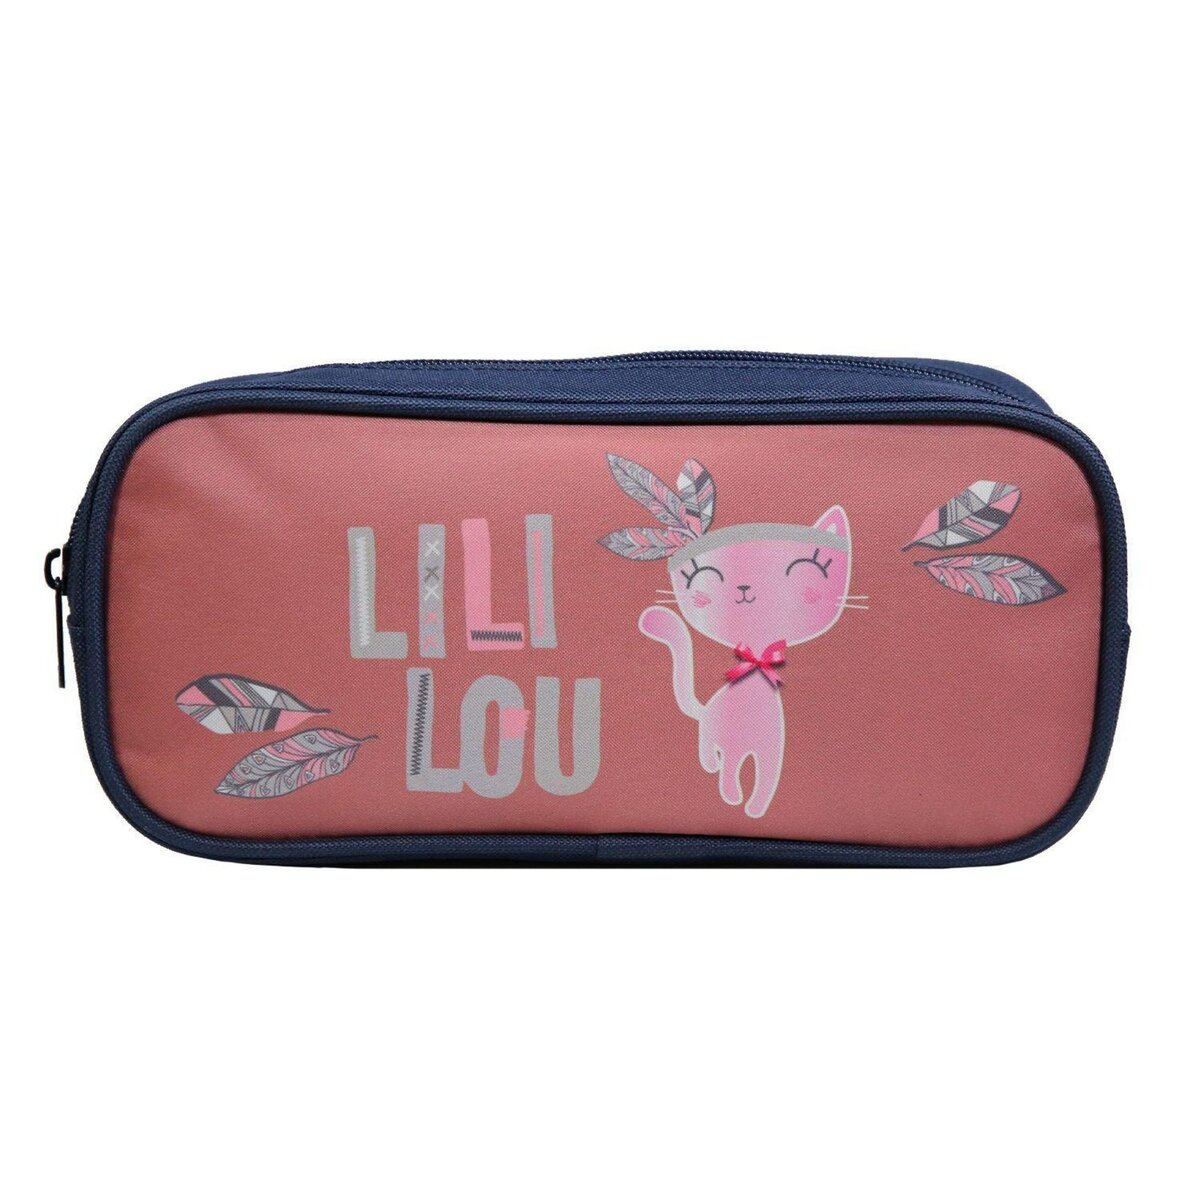 Bagtrotter Trousse scolaire rectangulaire Lili Lou Chat Rose Bagtrotter